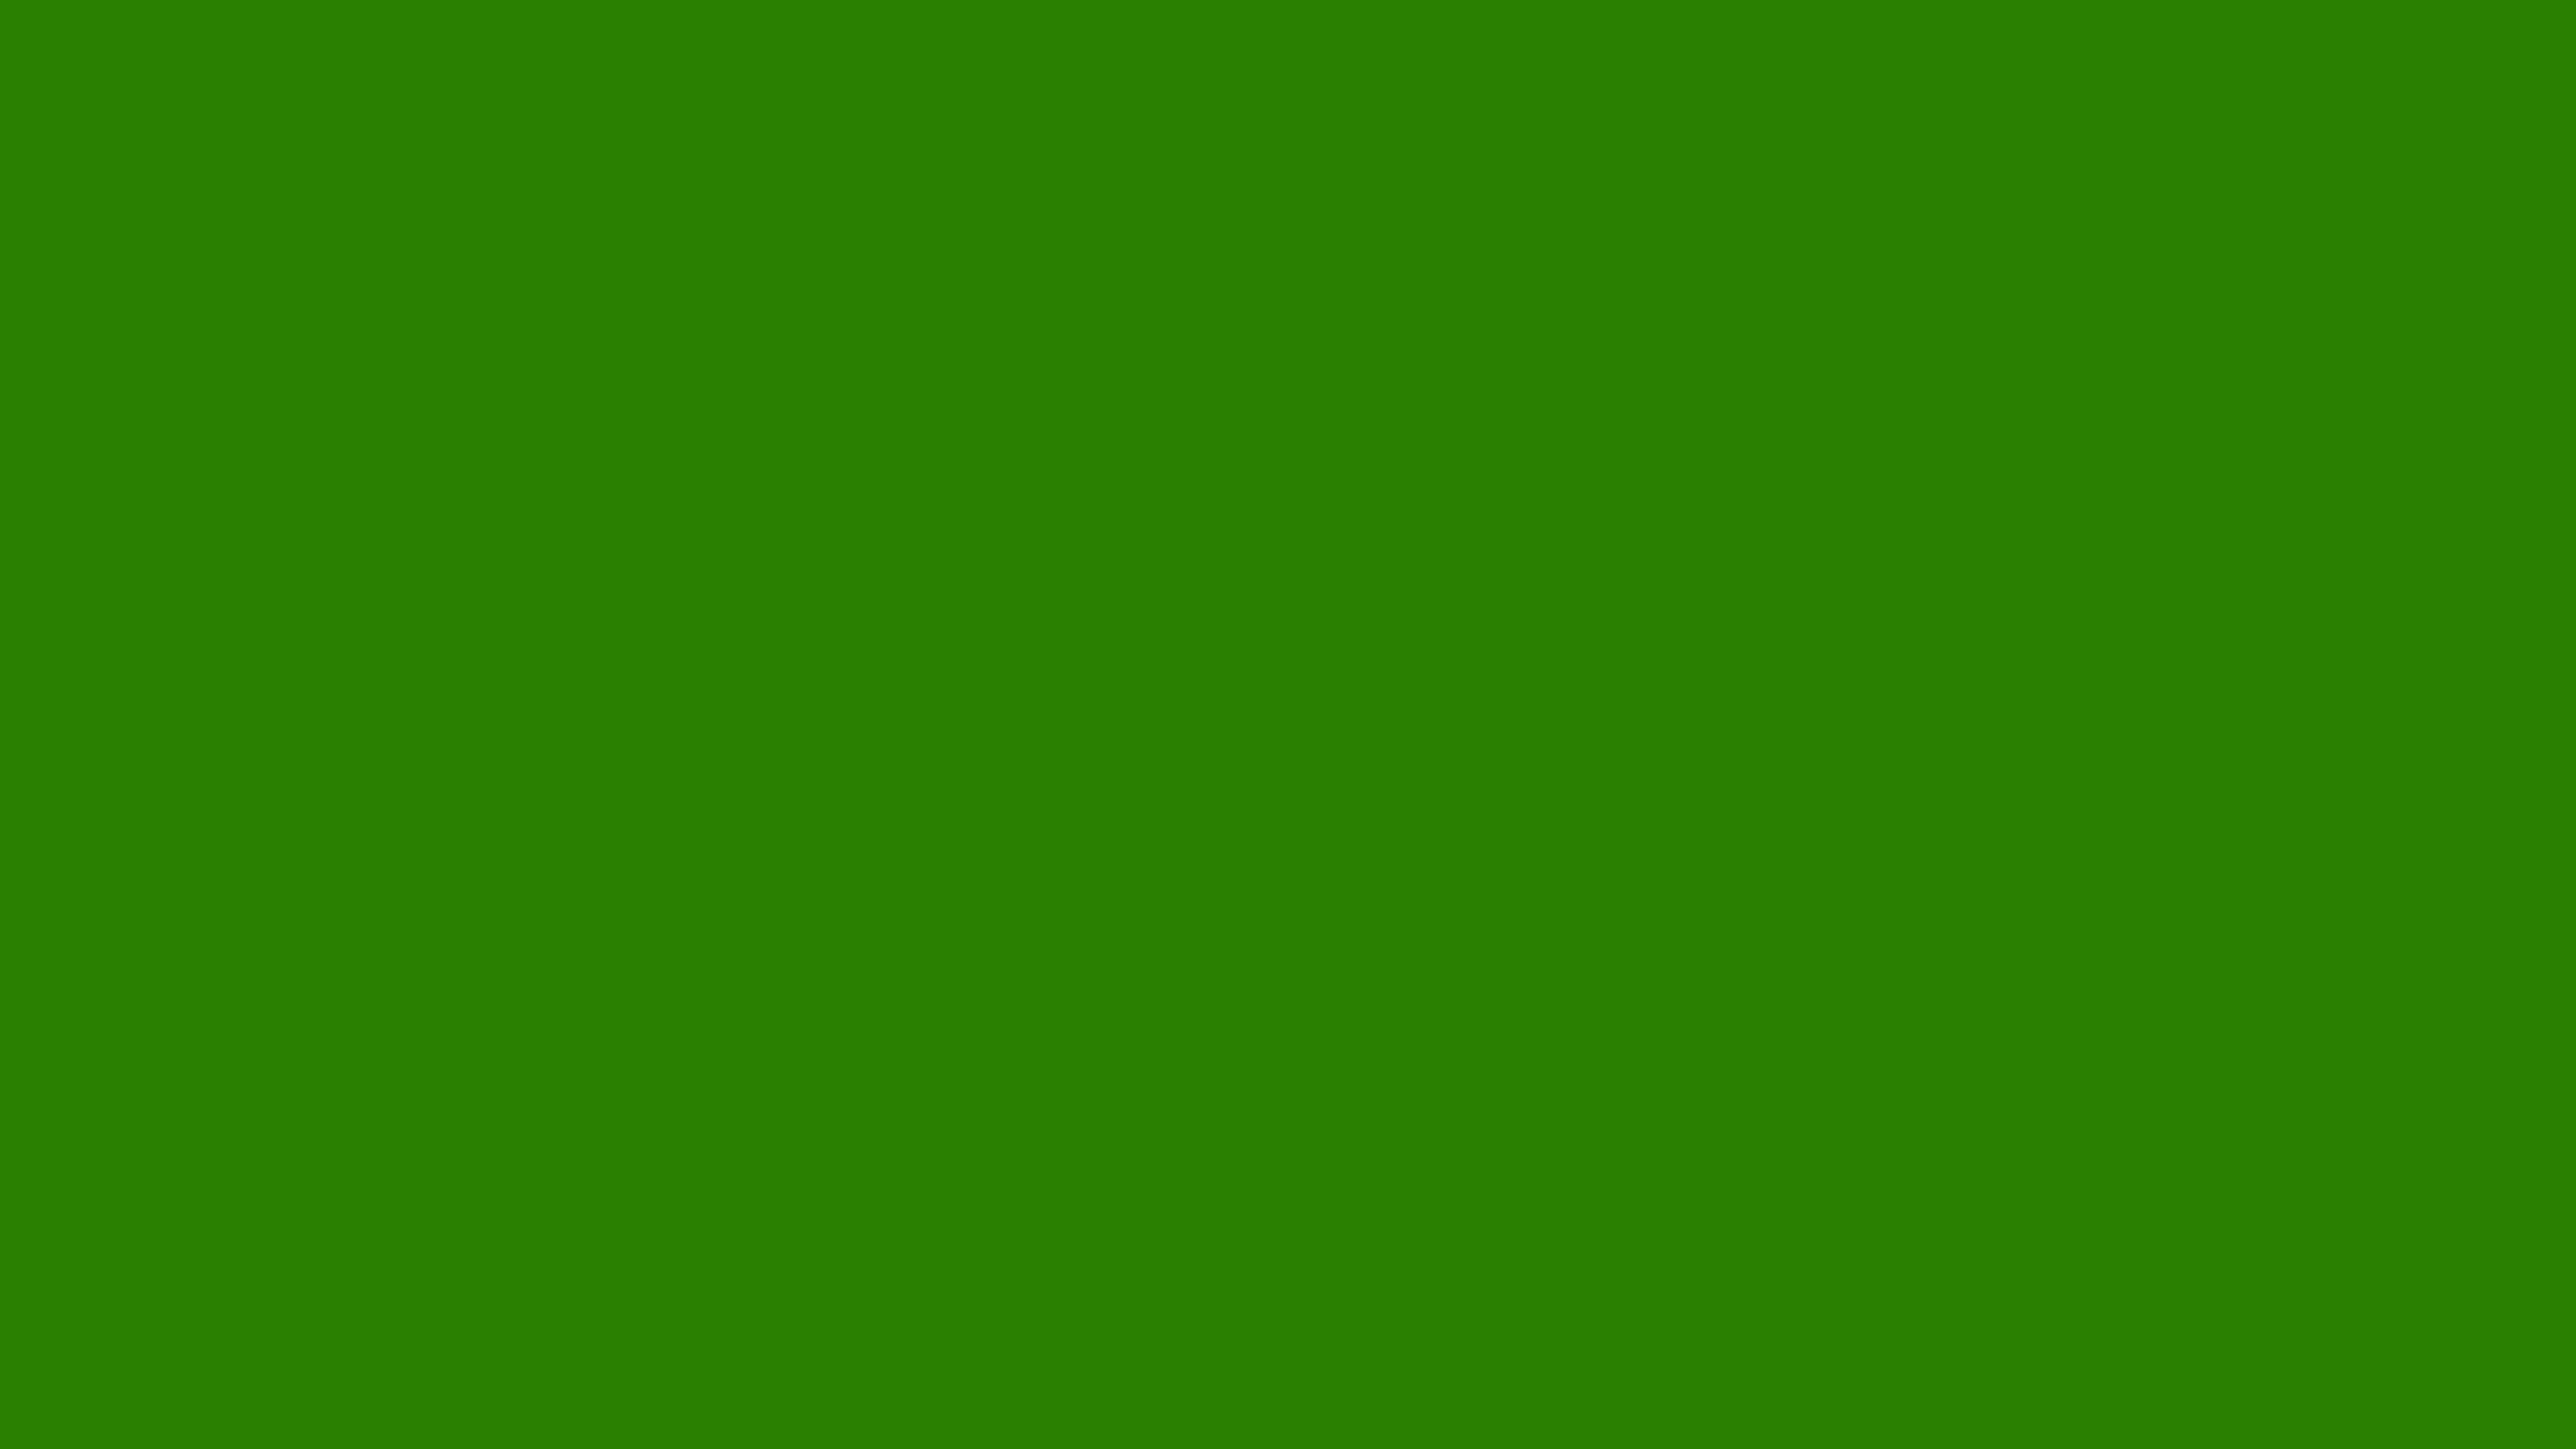 4096x2304 Napier Green Solid Color Background